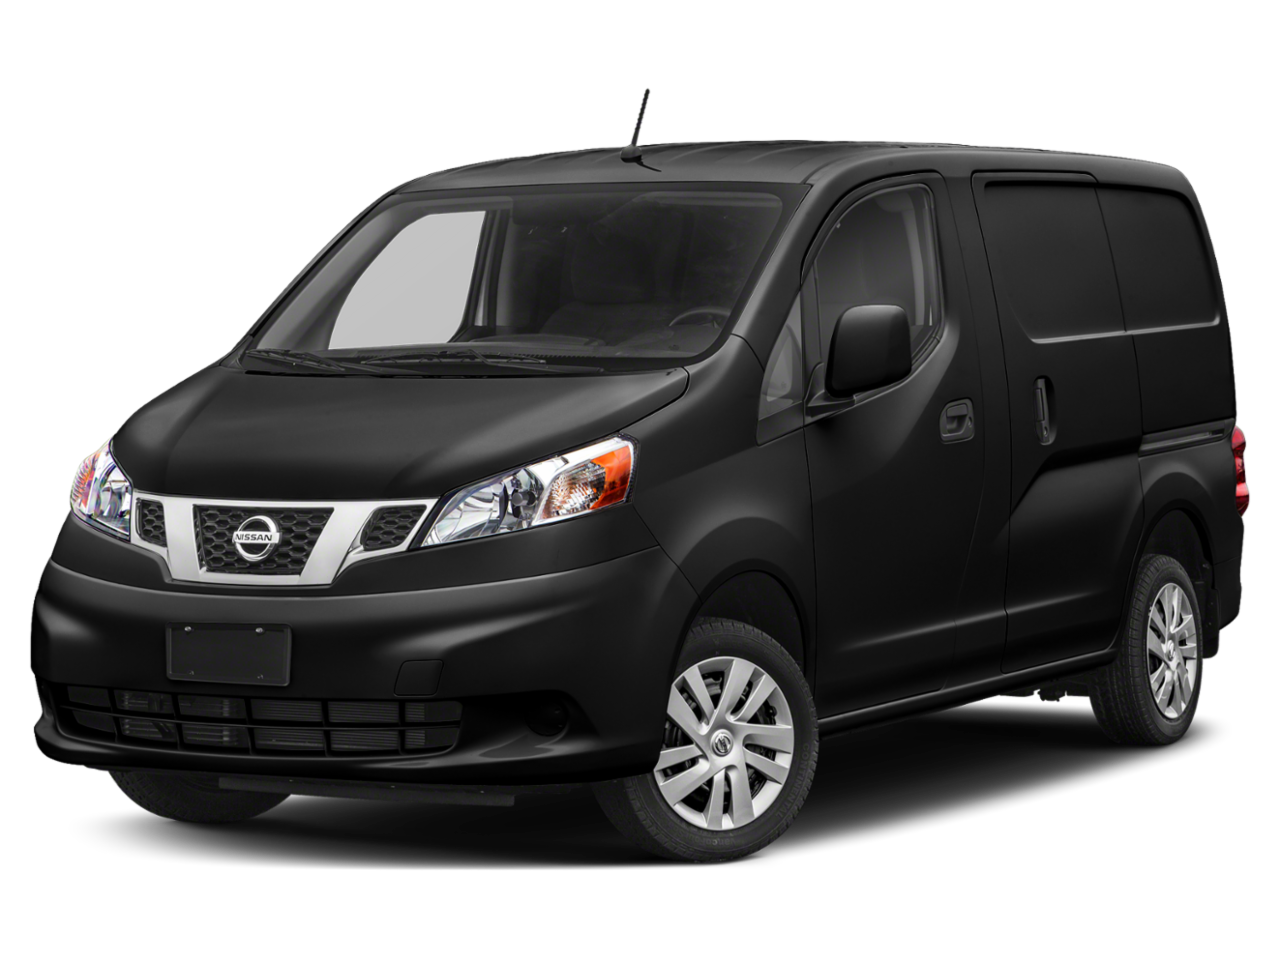 2018 Nissan NV200 Repair: Service and Maintenance Cost